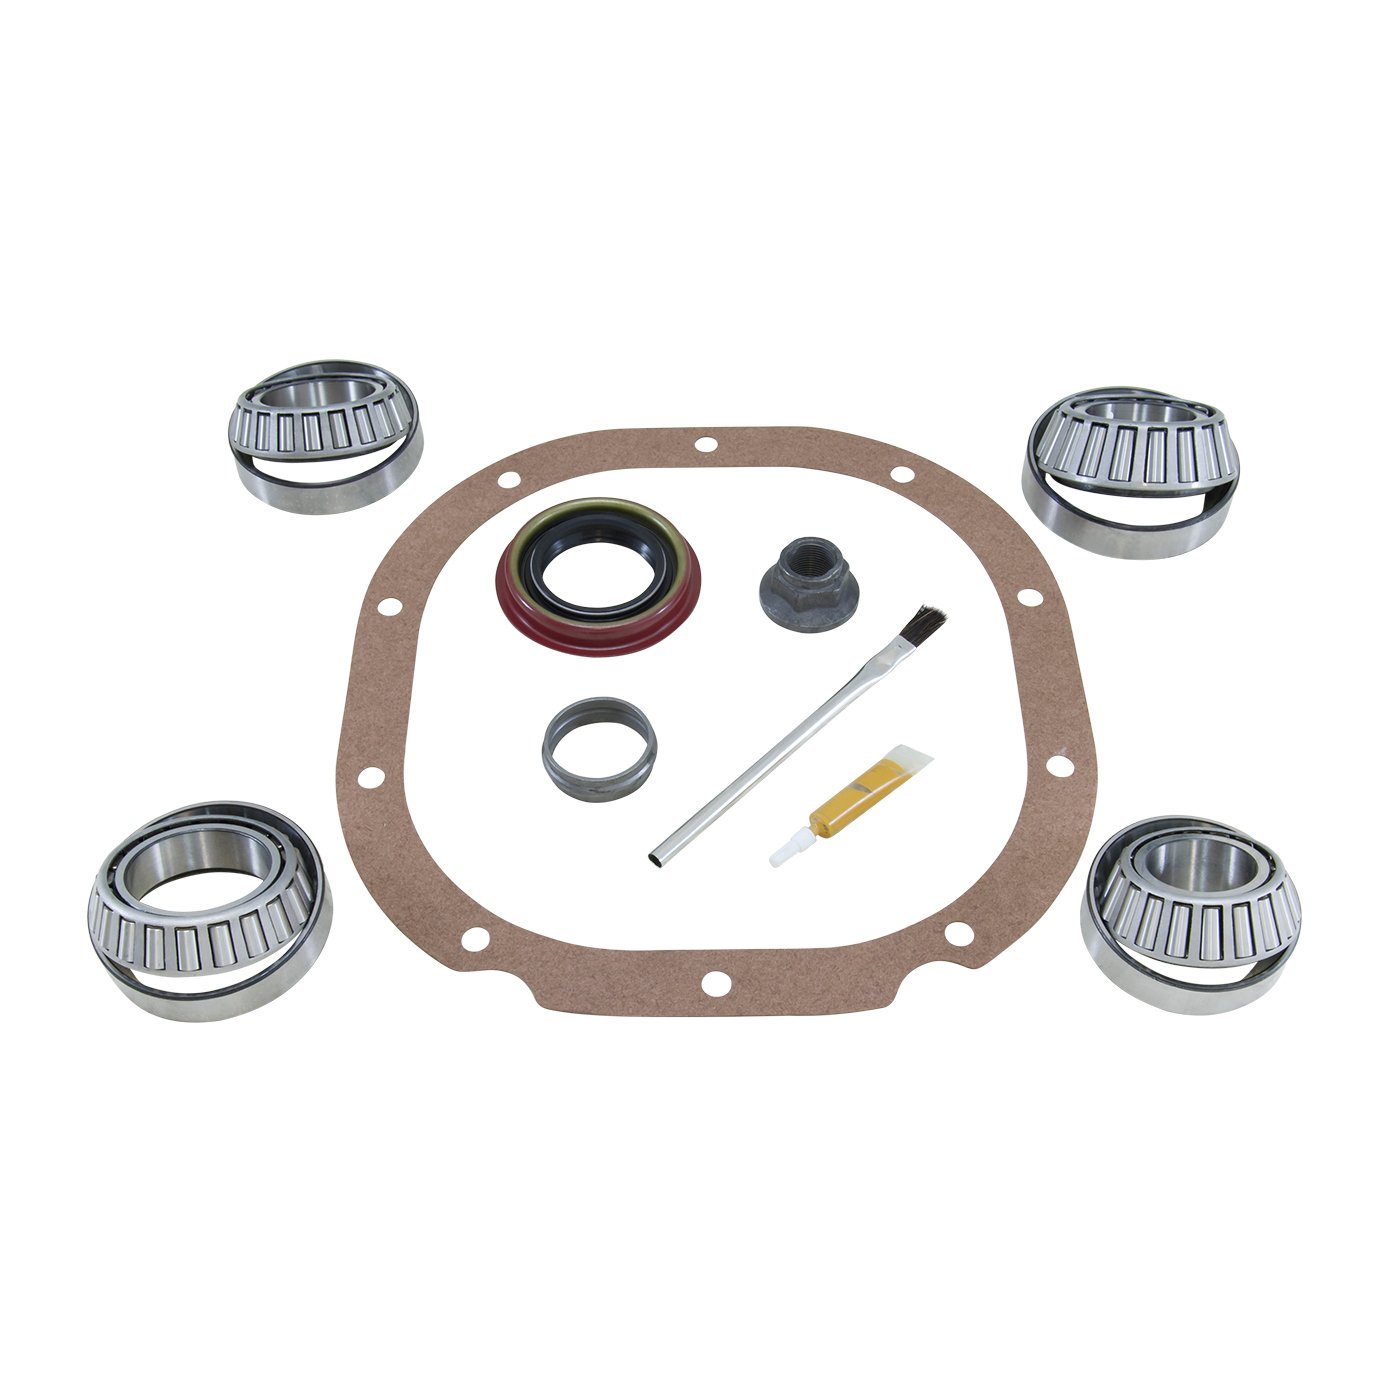 Bearing Installation Kit For 2009-Down Ford 8.8" Differential